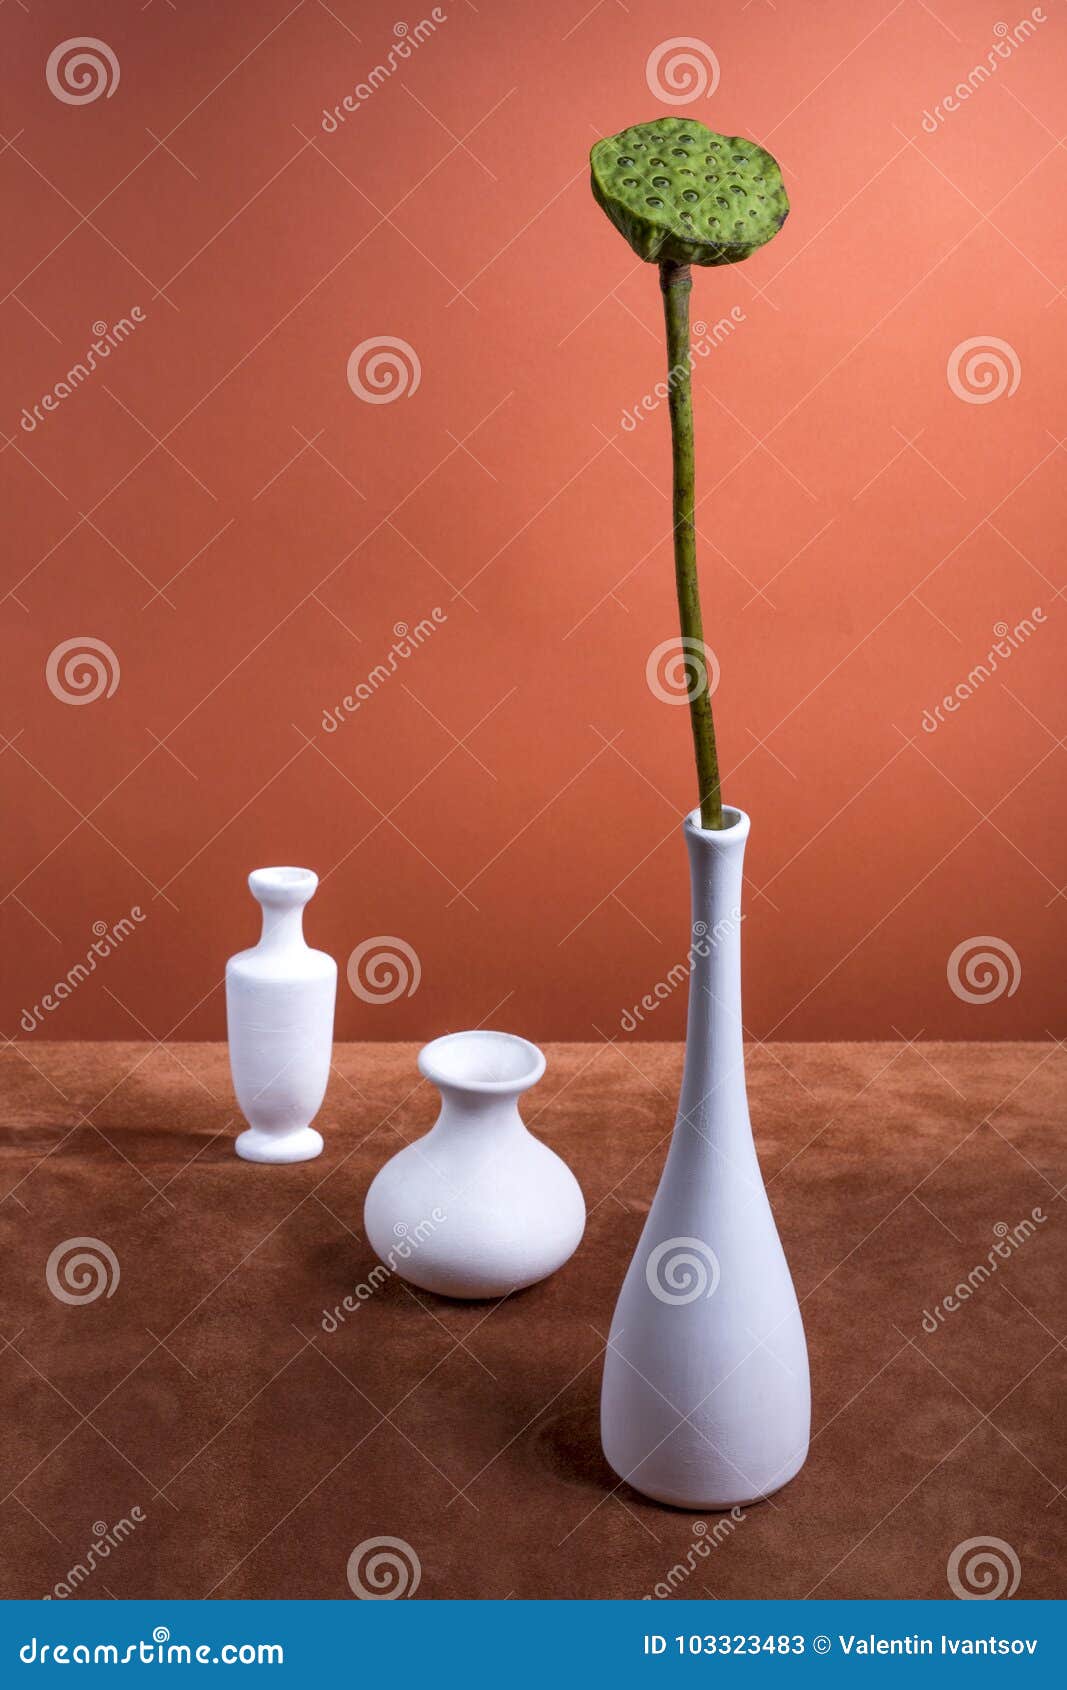 Still Life With A Lotus Flower Without Petals And Vases